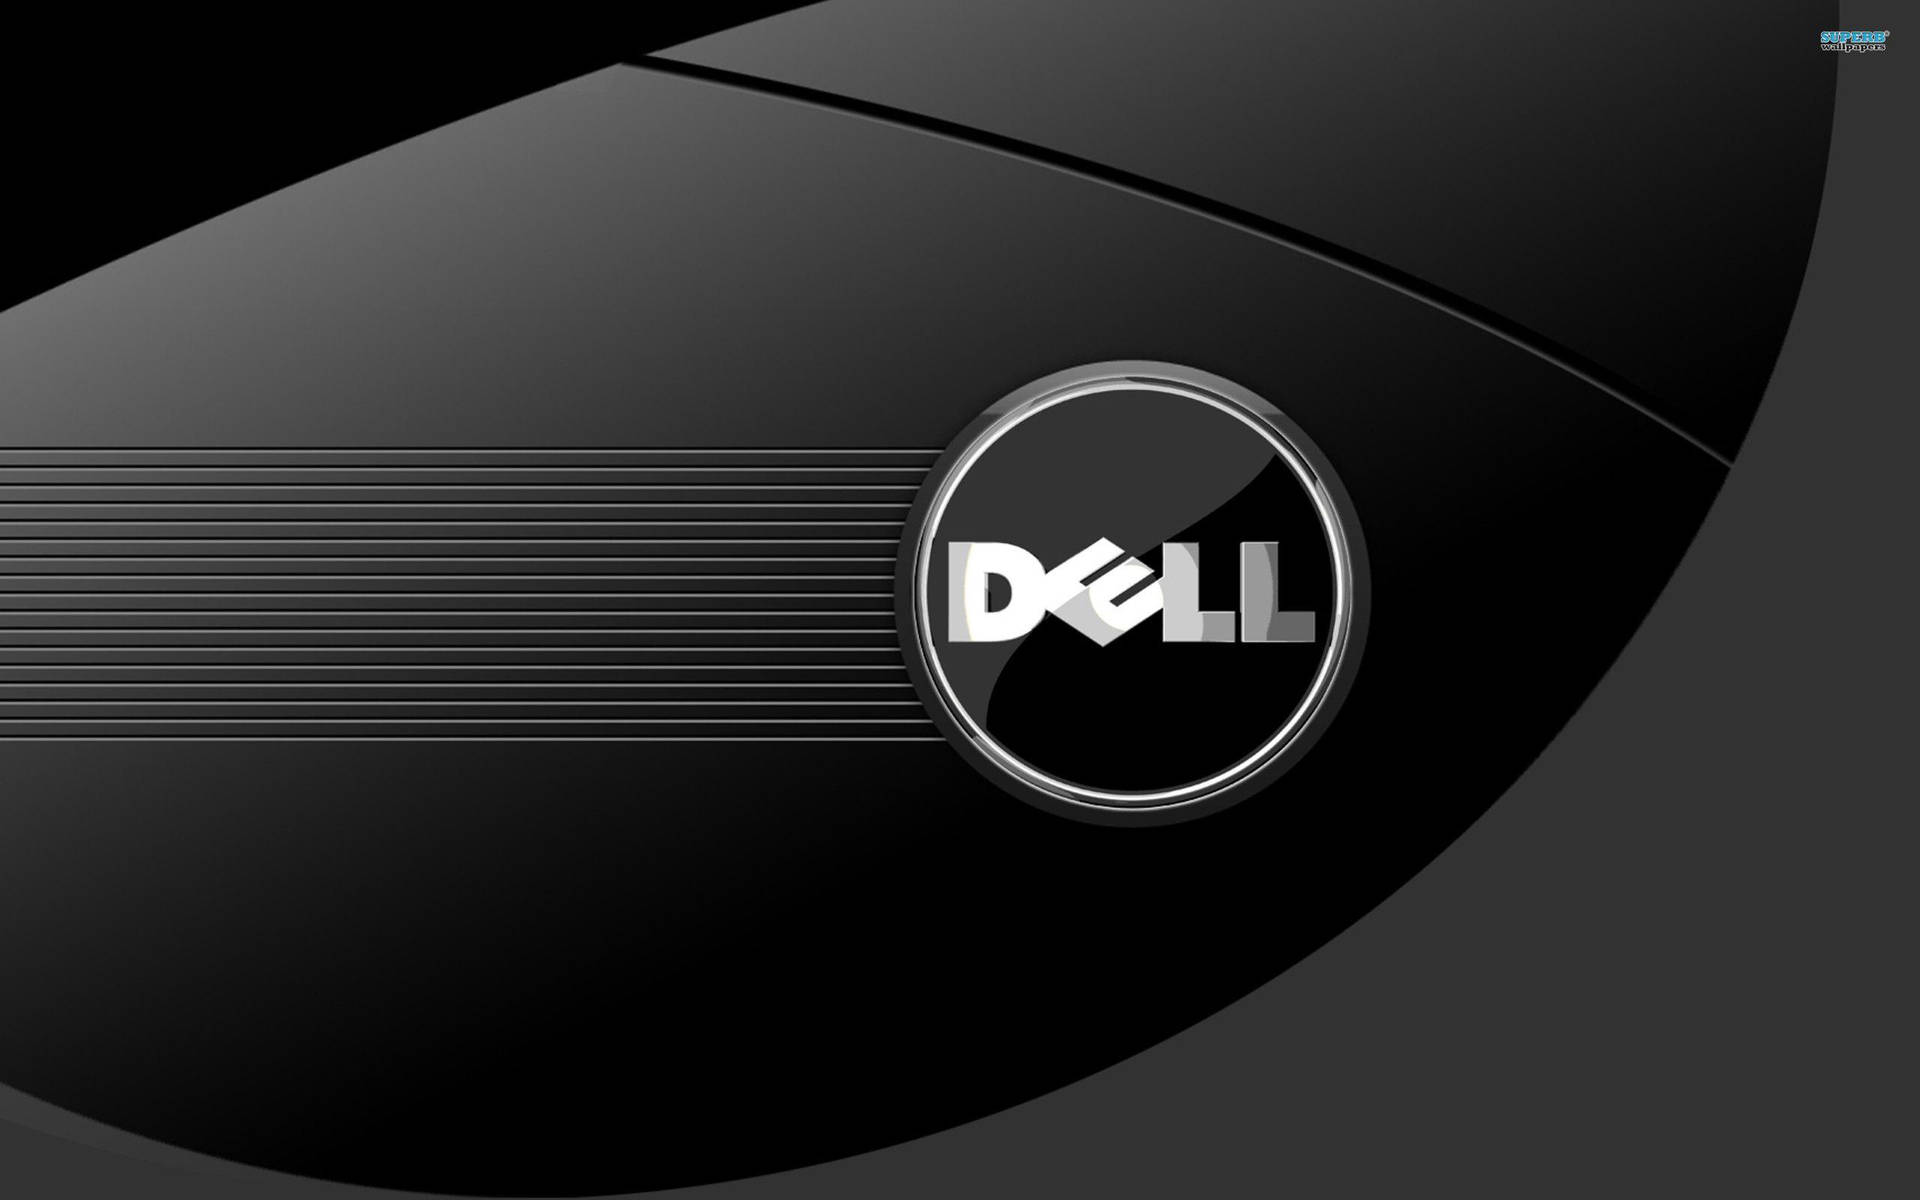 Dell Background